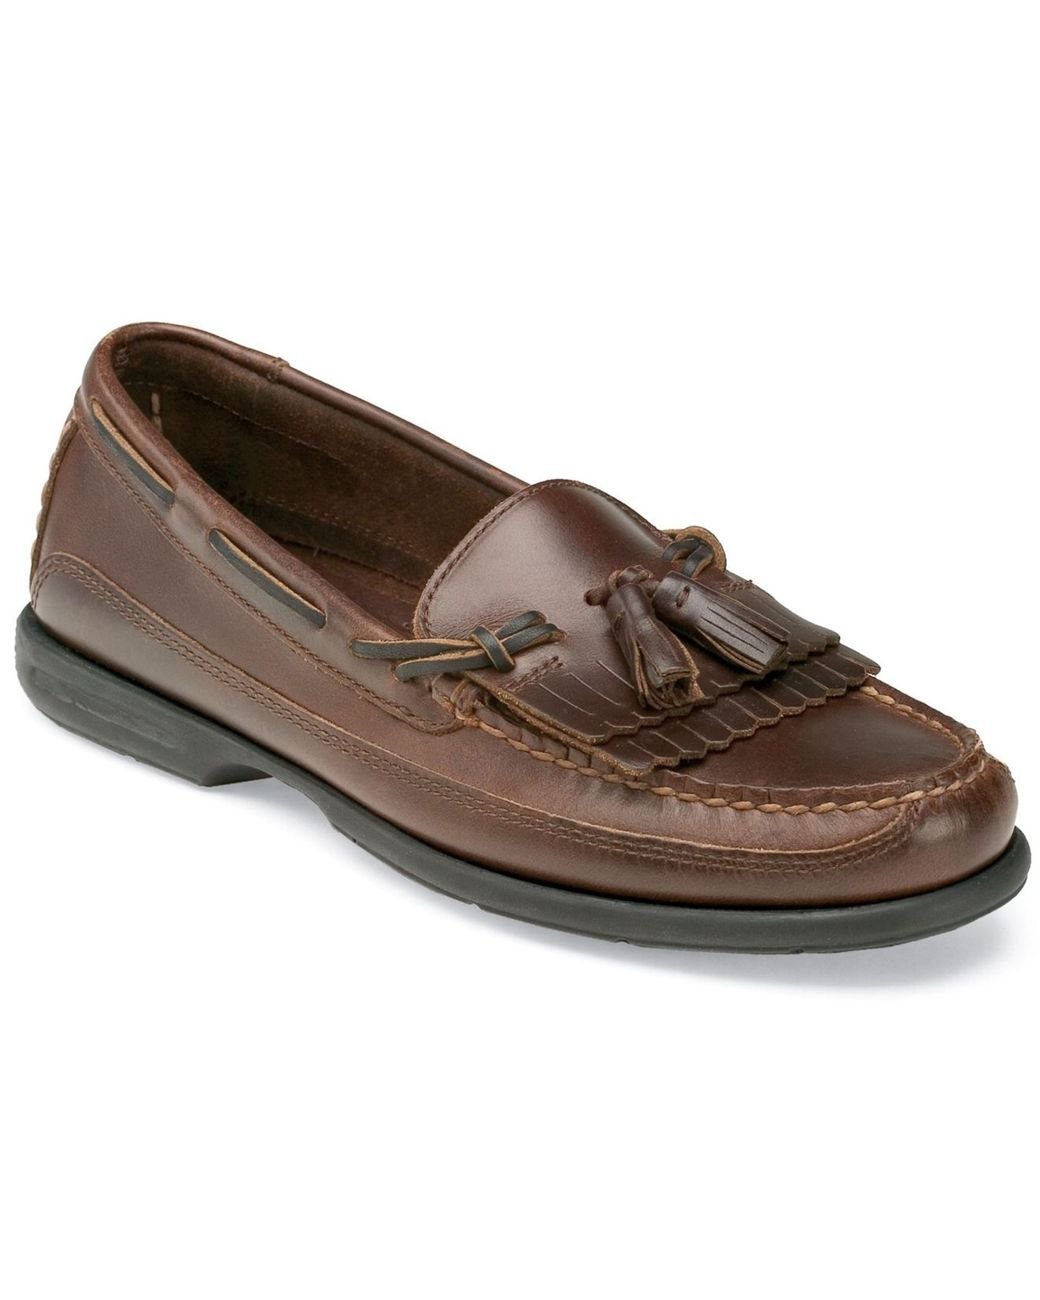 Pigottee, Men's brown leather Moccasins with Tassels